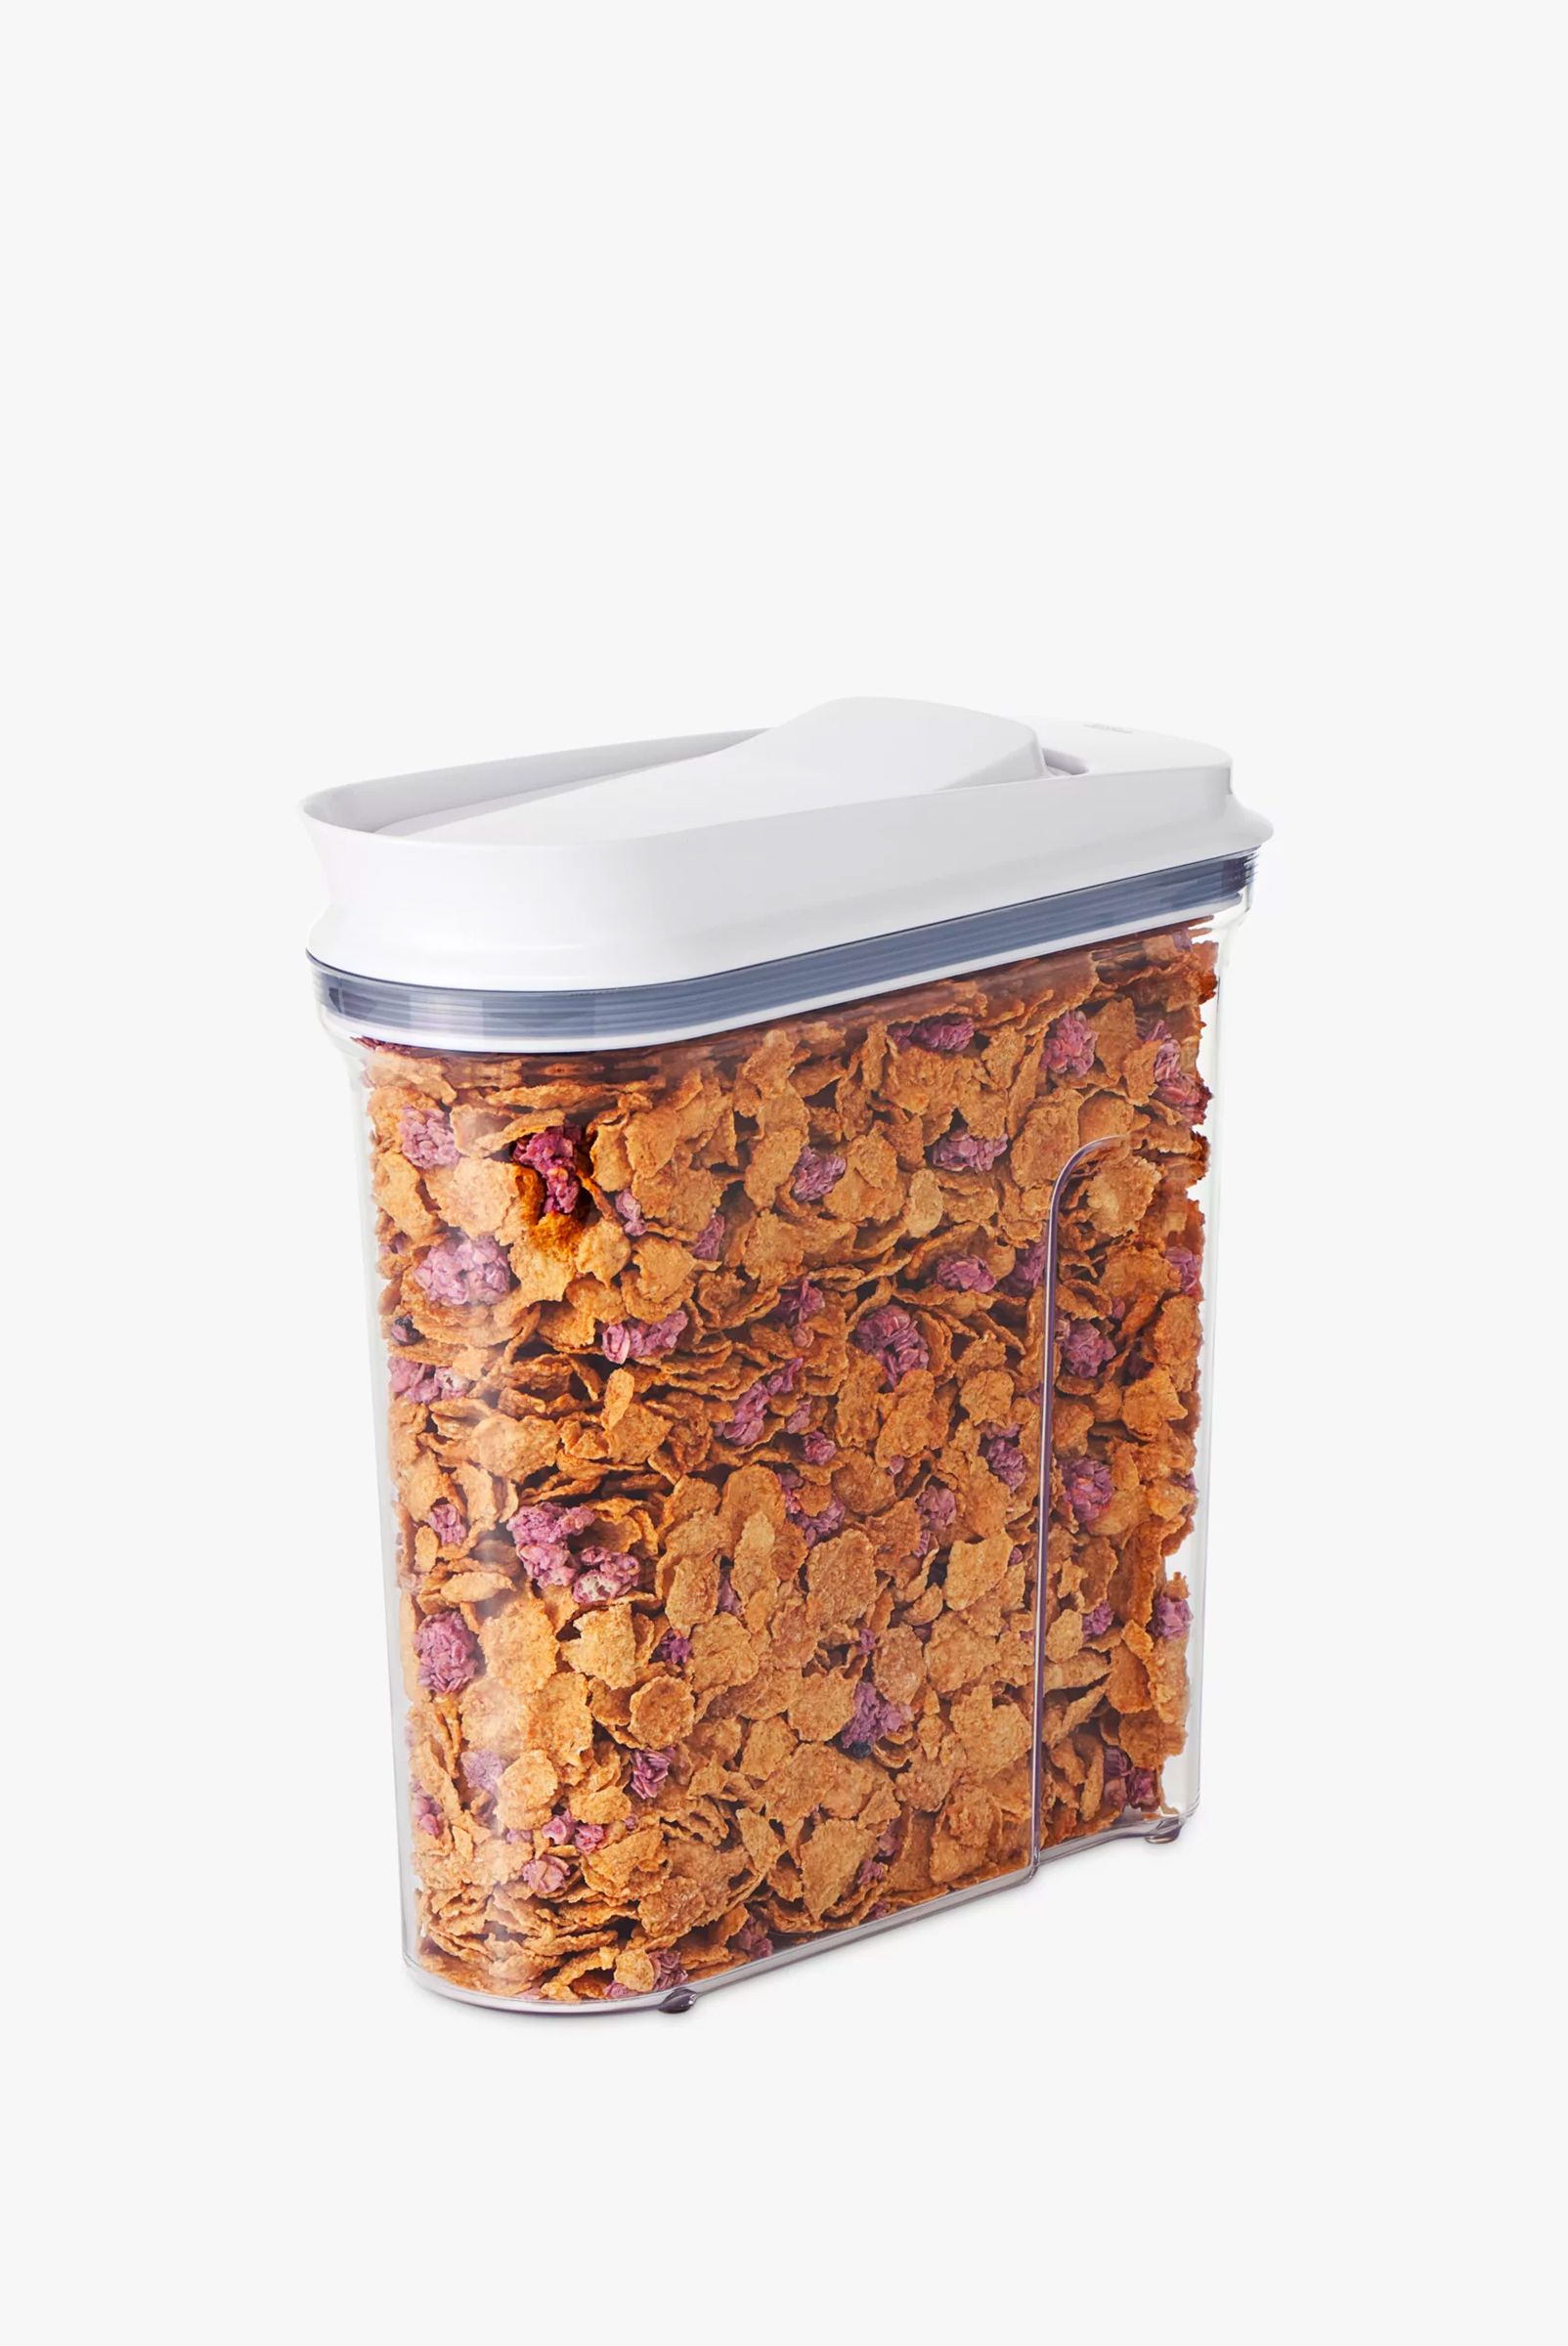 OXO Pop Cereal Box Storage Container, £19.99